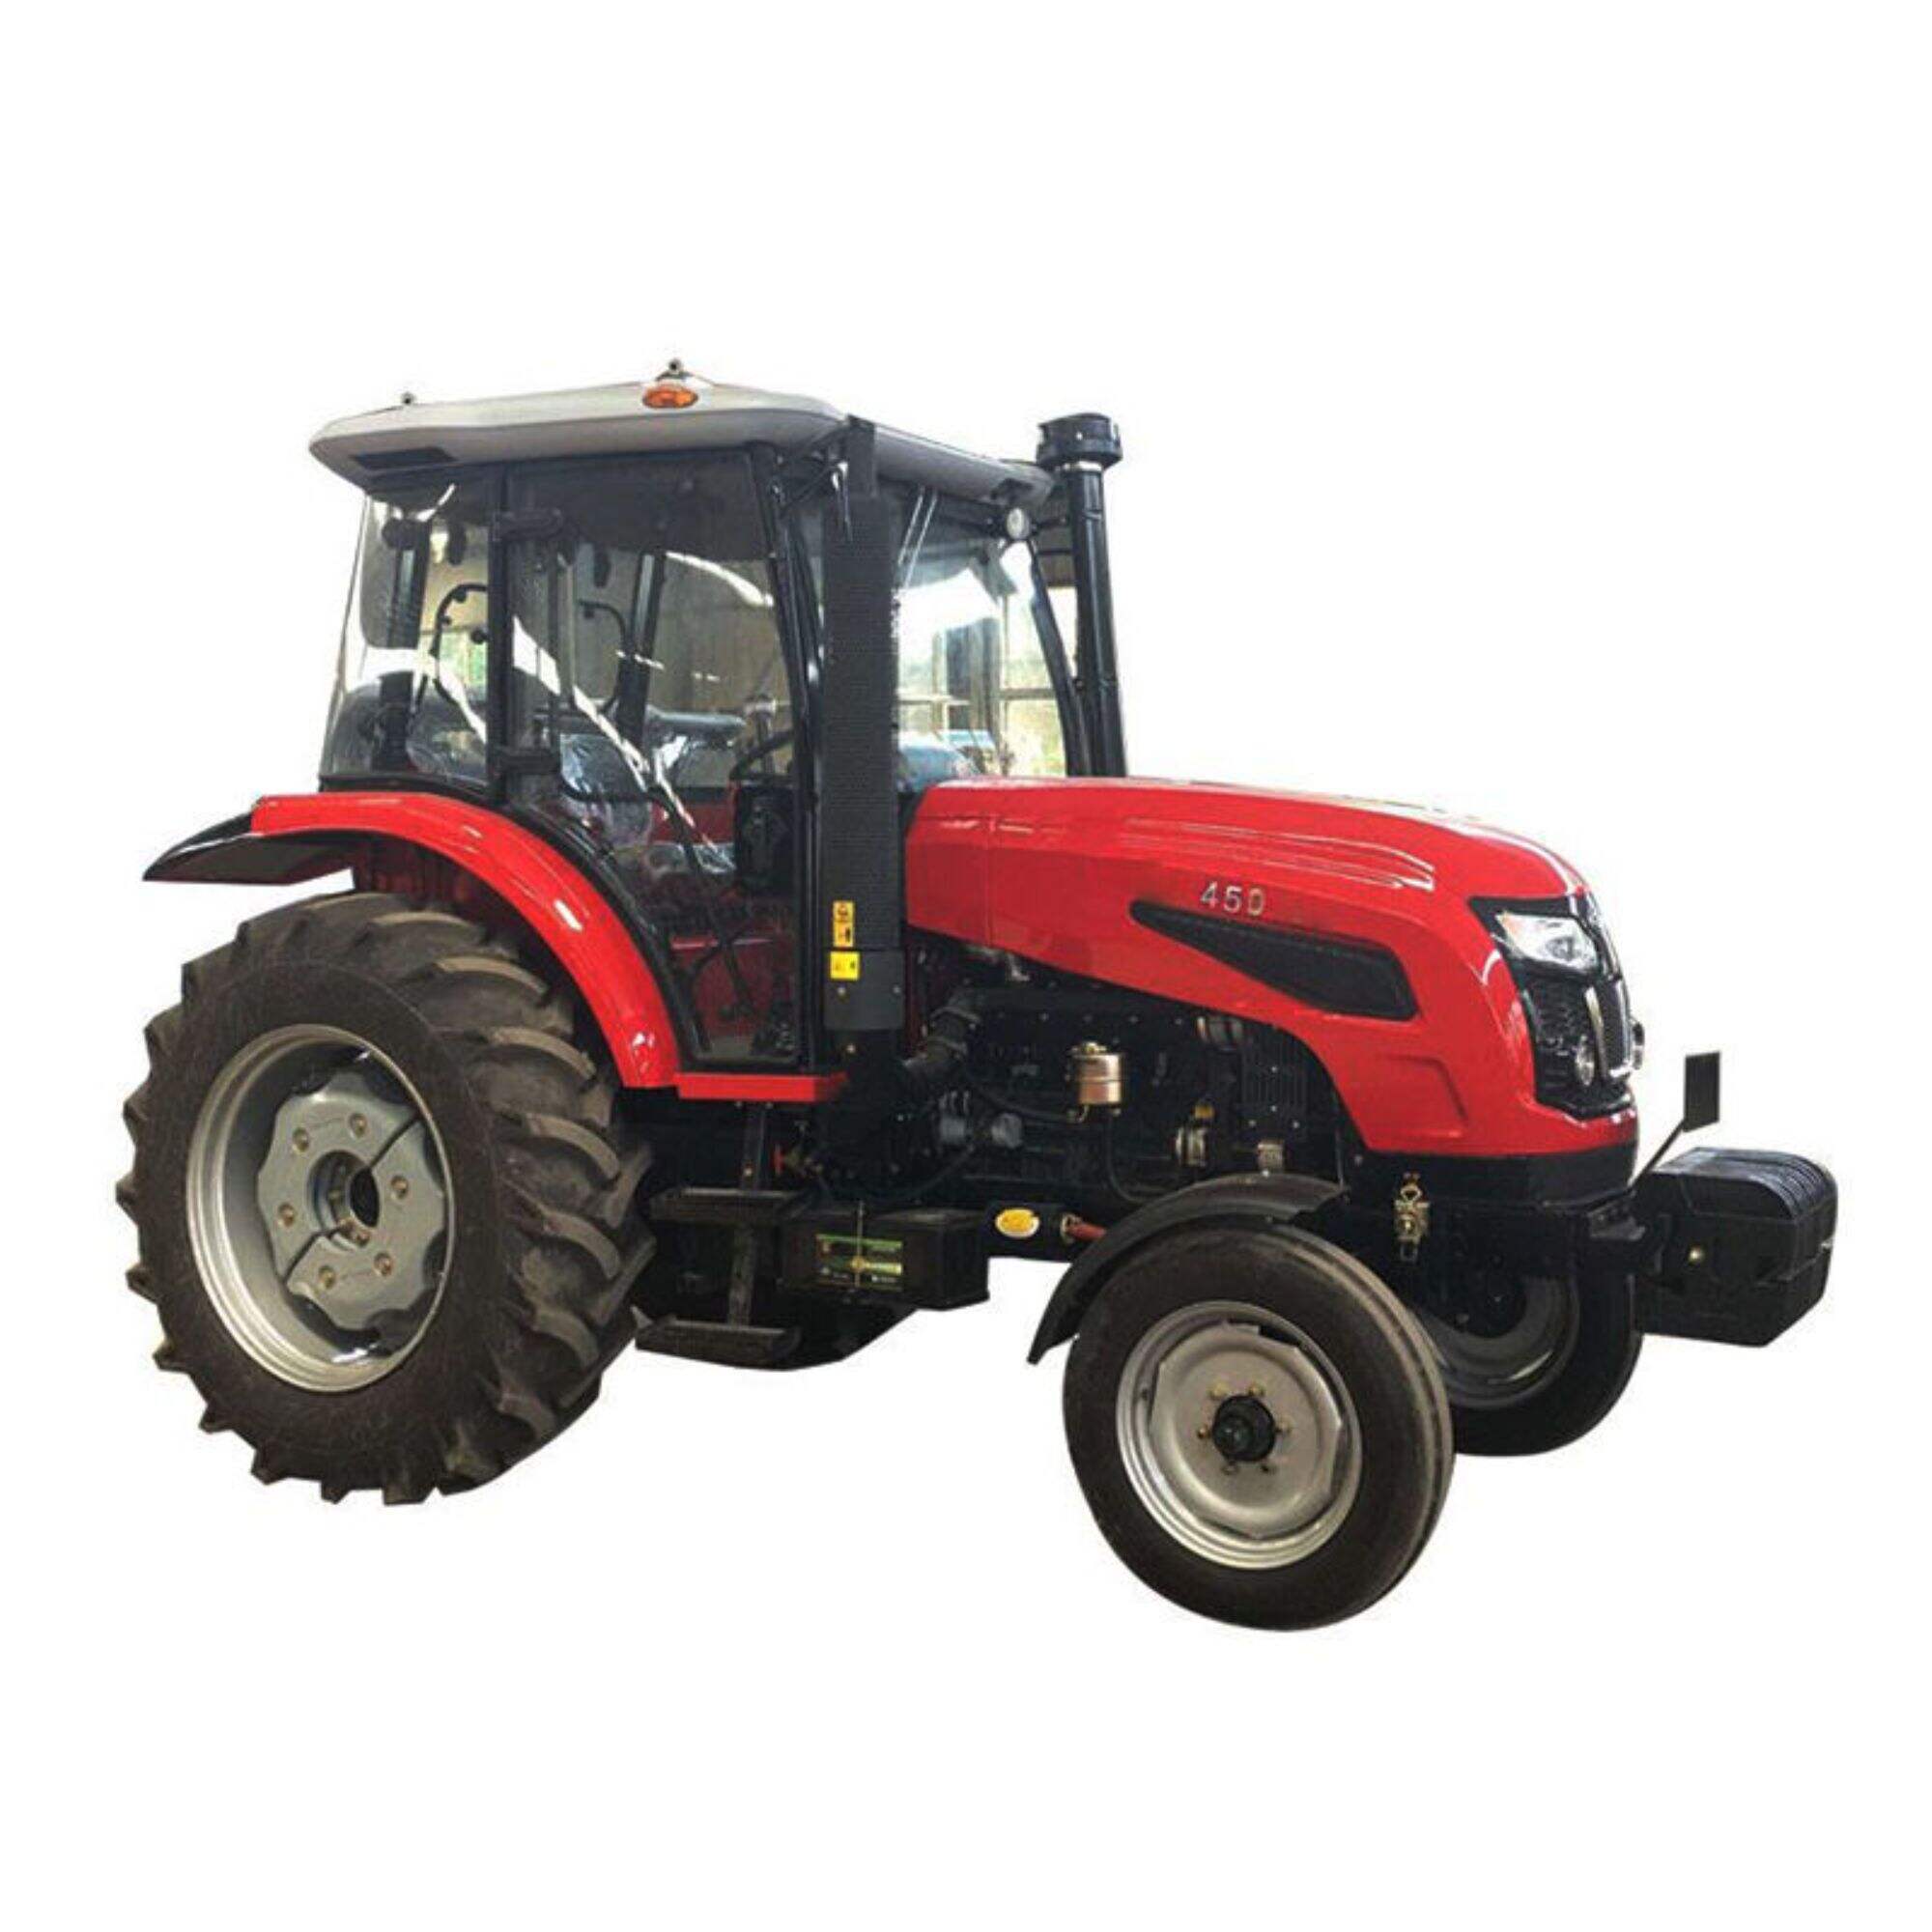 Hot Sell Self-Propelled Tractores agricolas 4x4 Used Compact Tractors LUTONG 604E for Agriculture